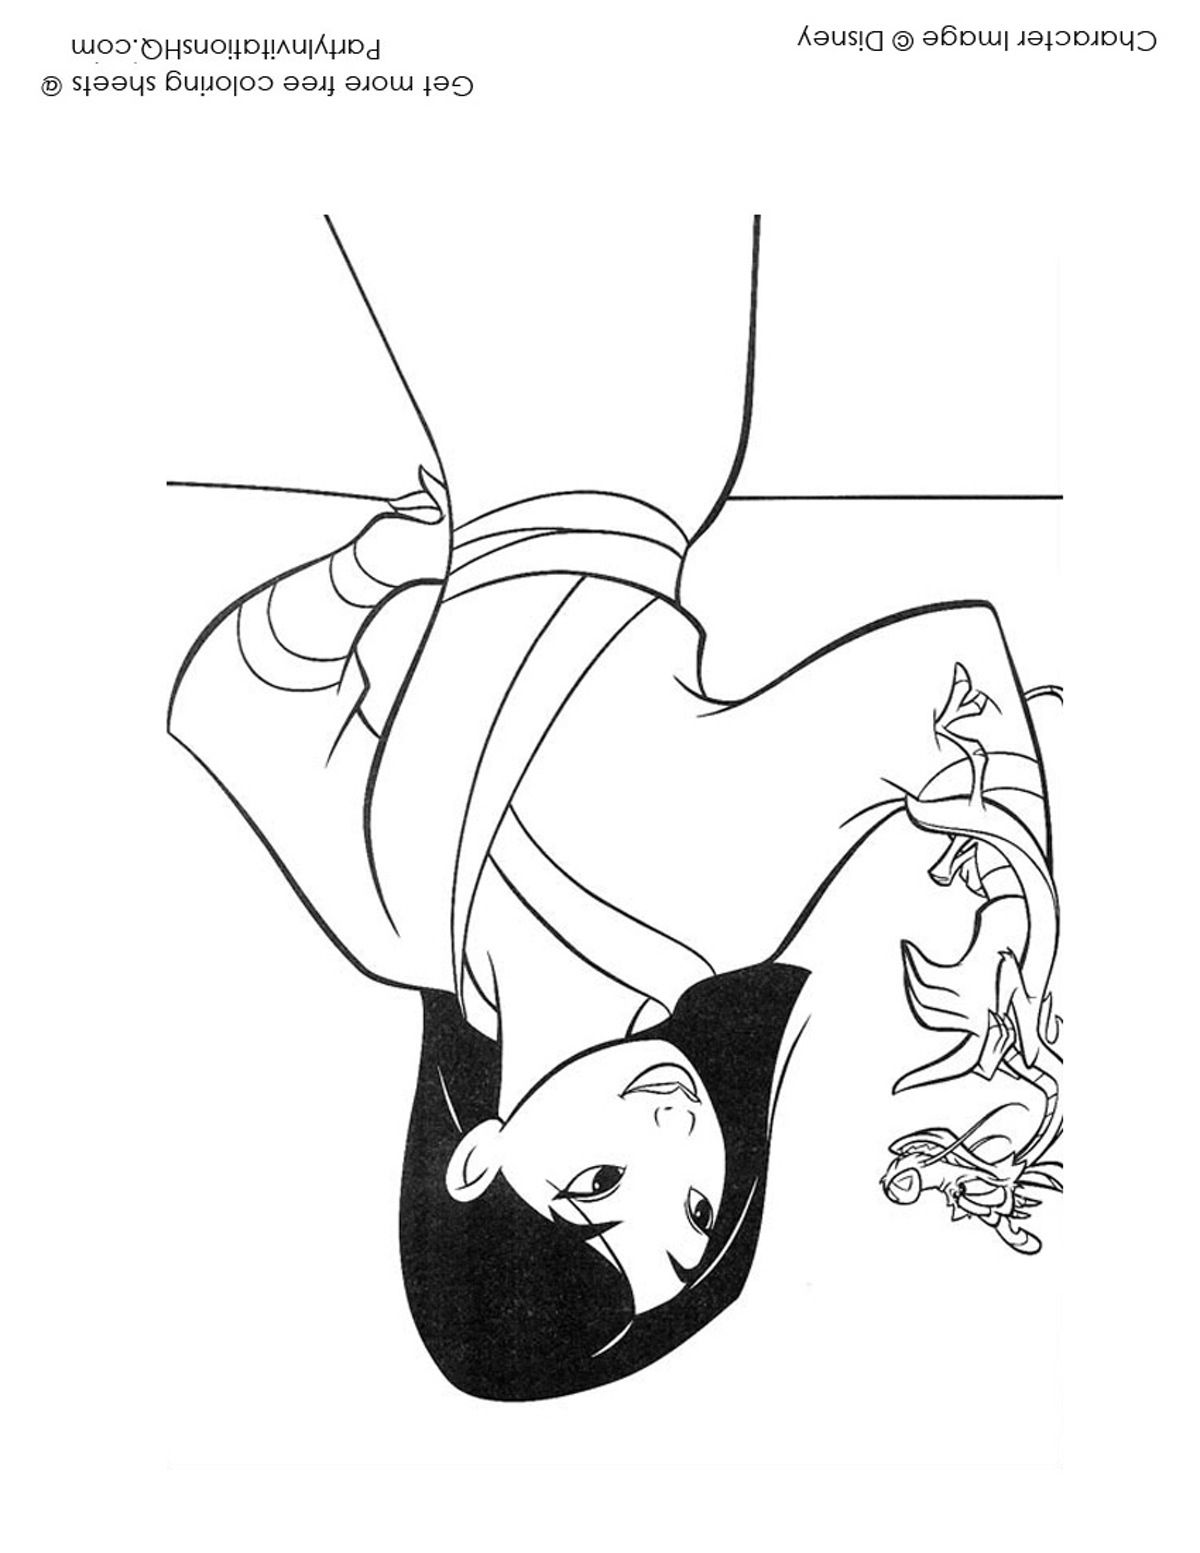 Coloring : Mulan Coloring Page Pageant Dresses For Sale. Pageant ...